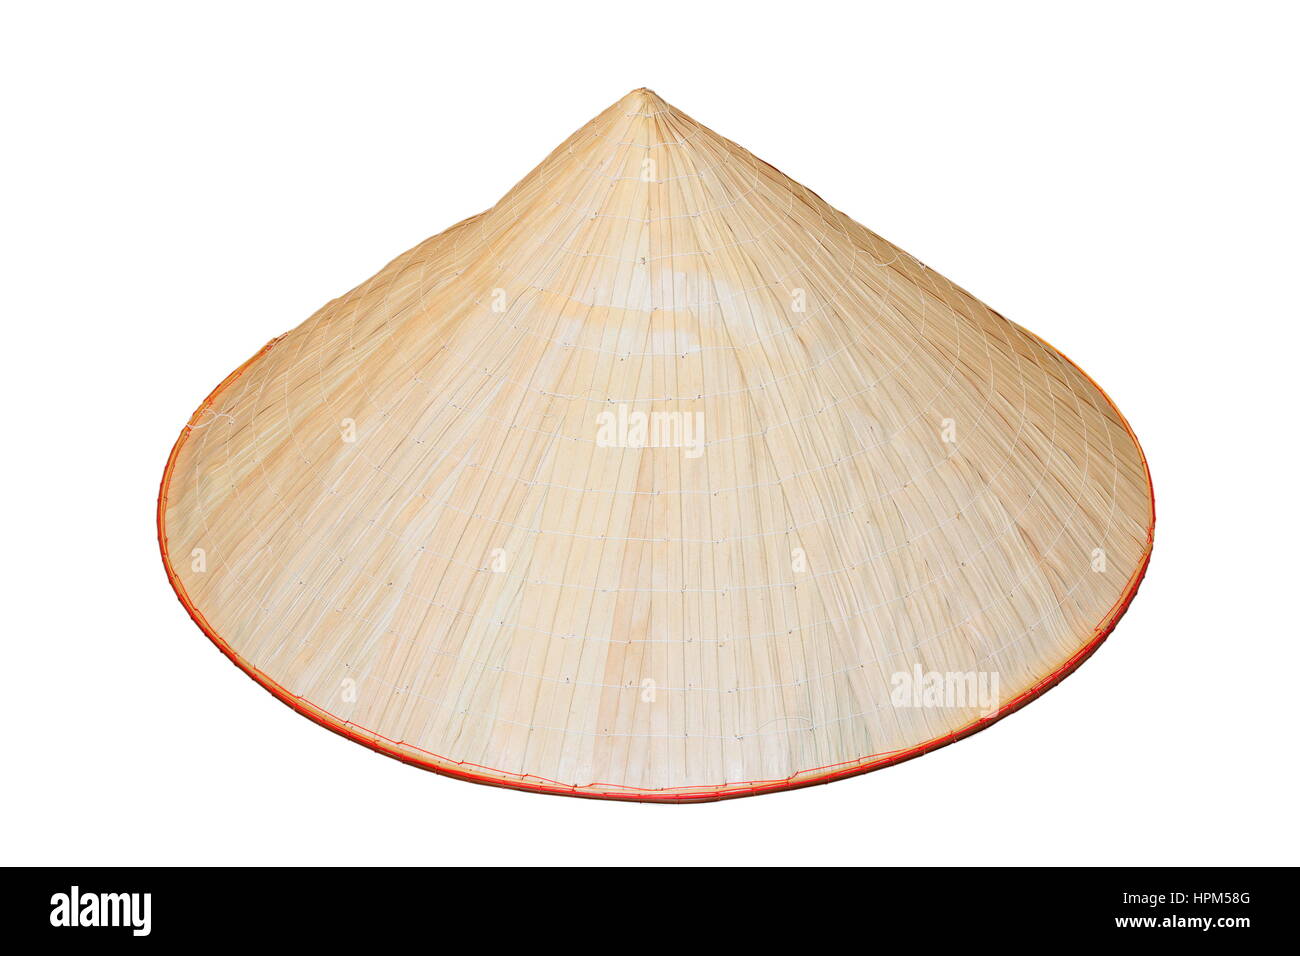 Asian bamboo hat isolated over white background Banque D'Images